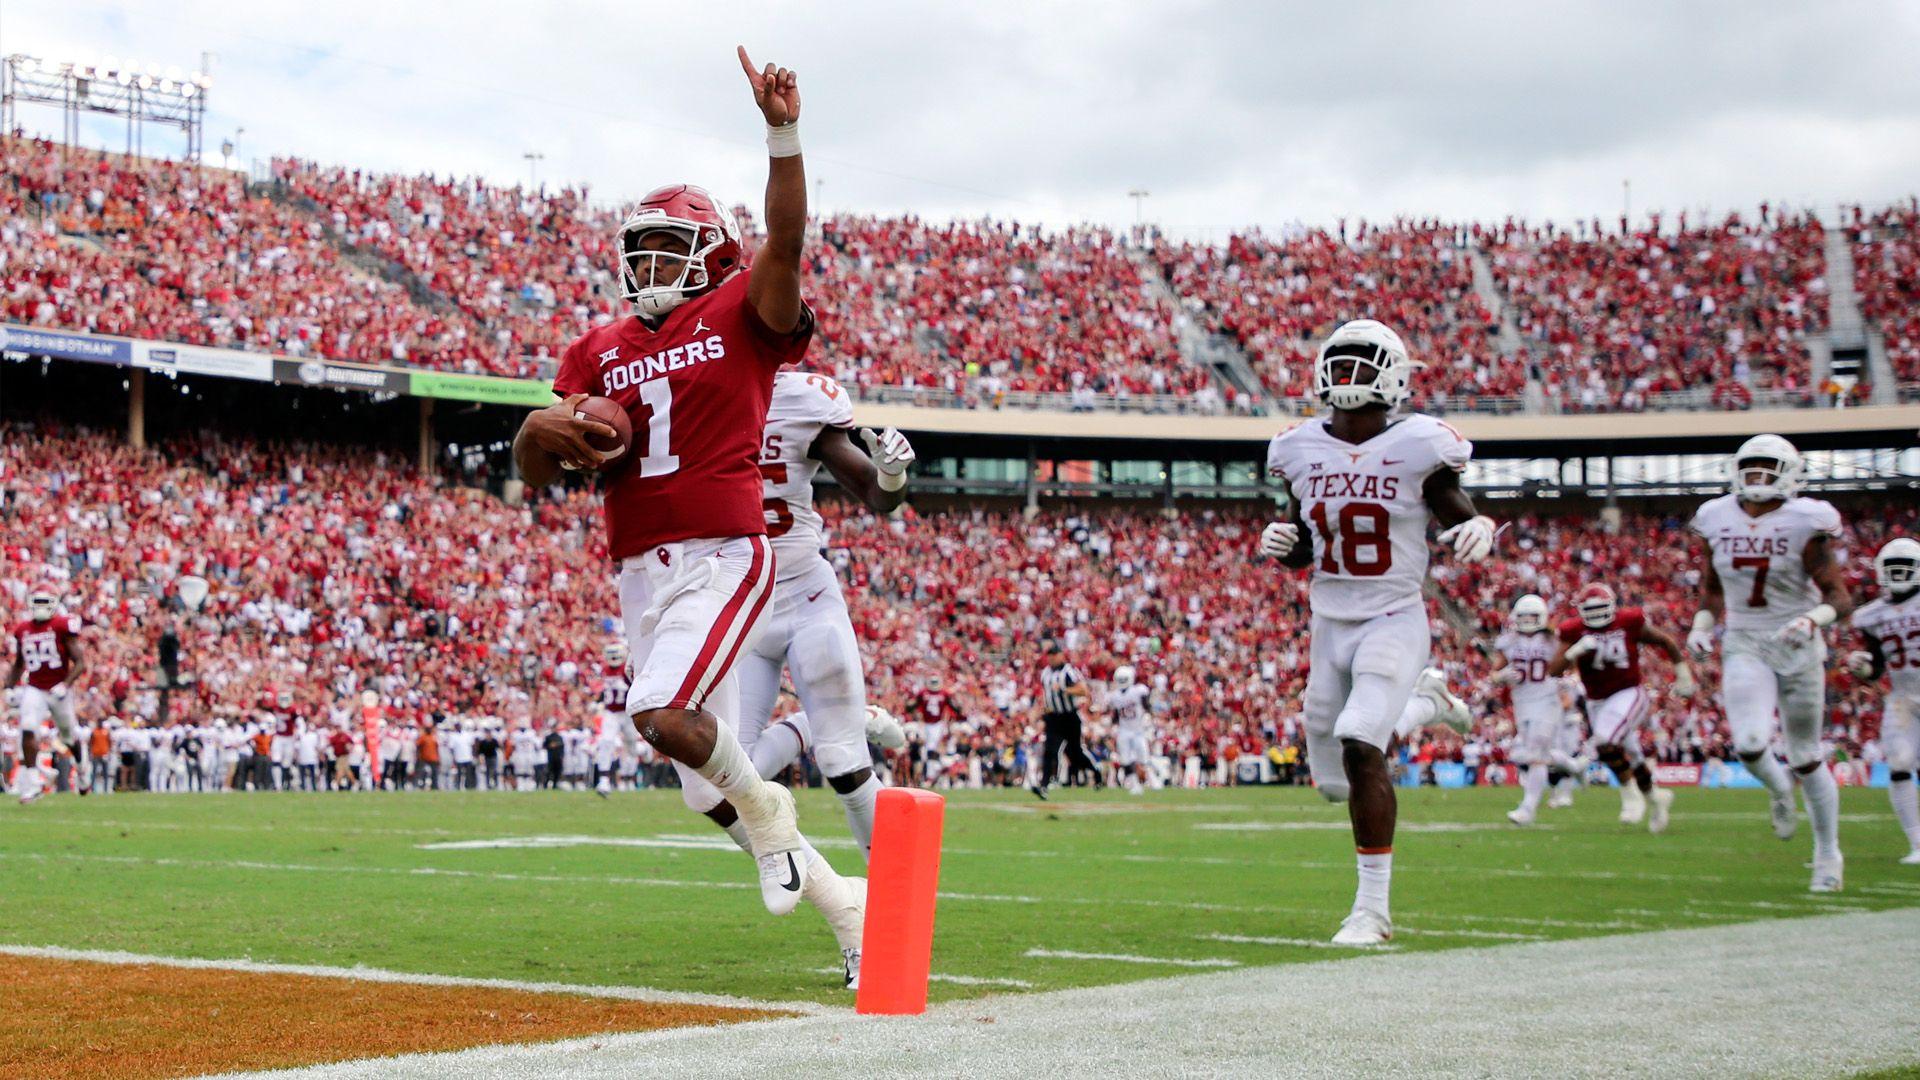 Kyler Murray suffers first loss as OU starting QB in wild Red River